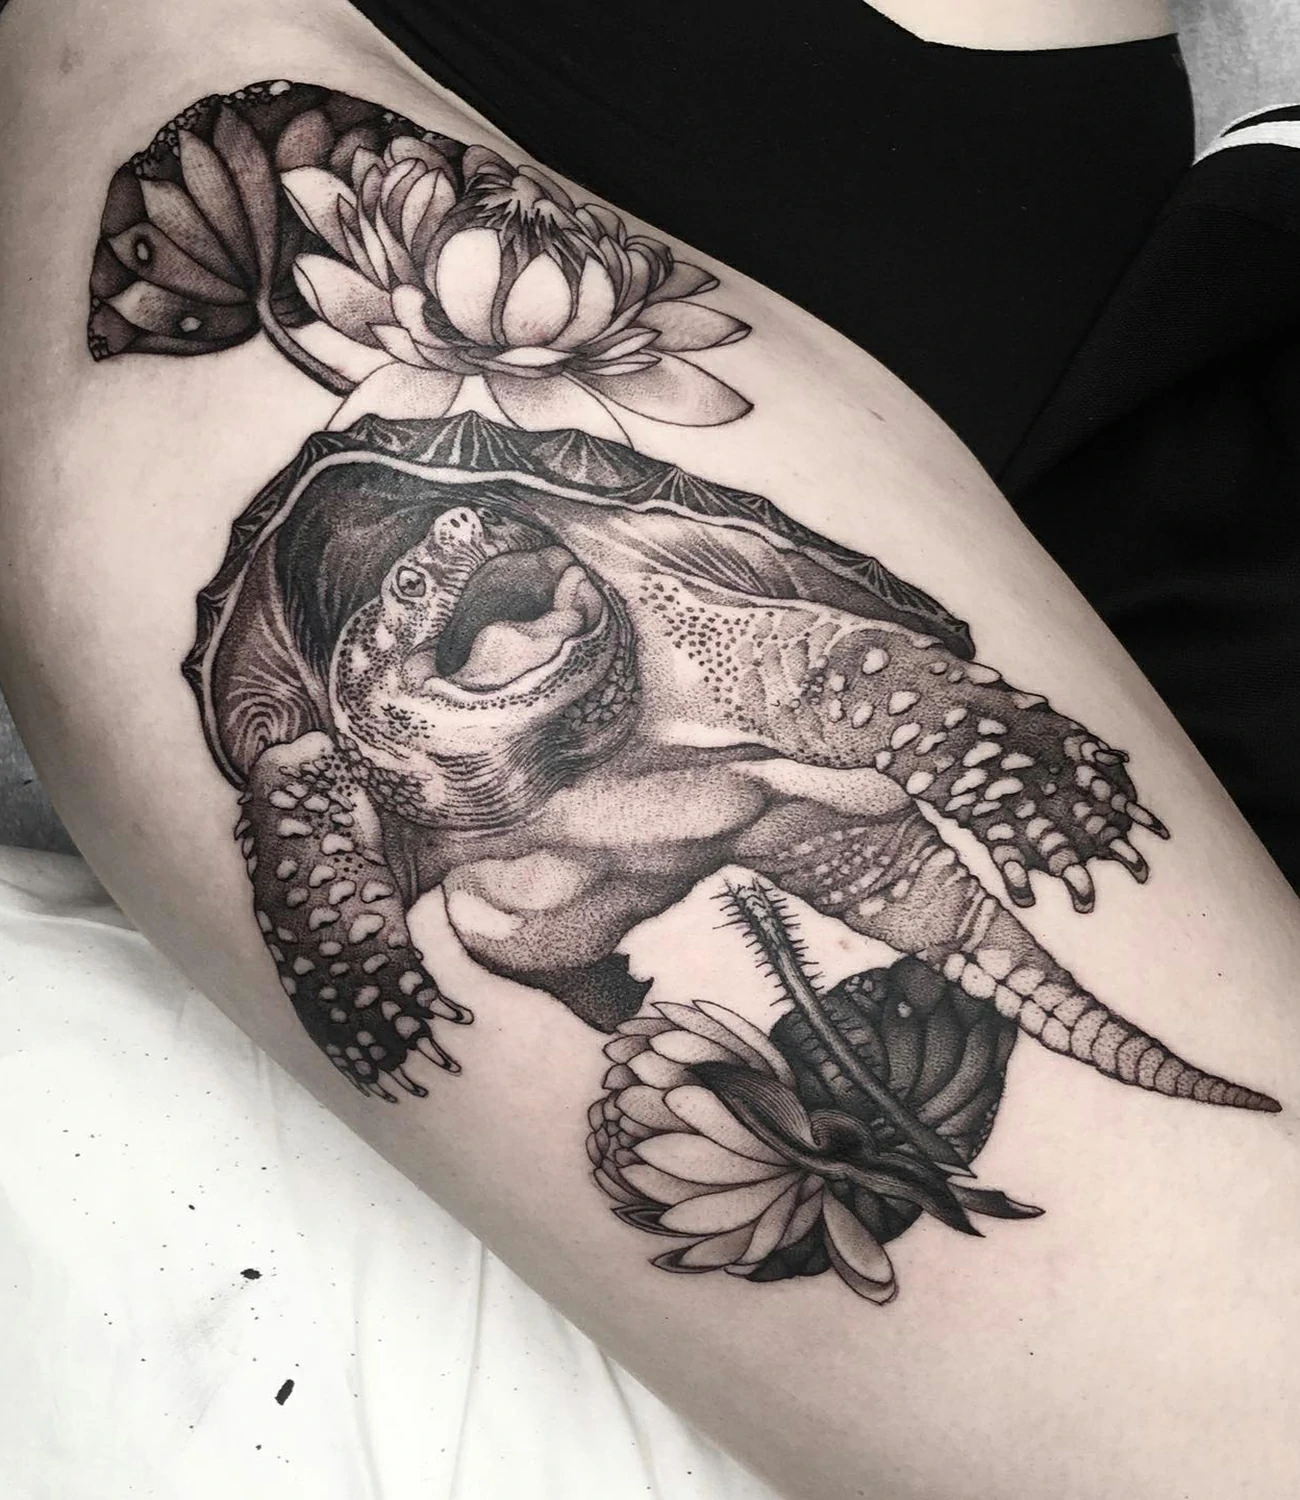 Snapping Turtle Tattoo